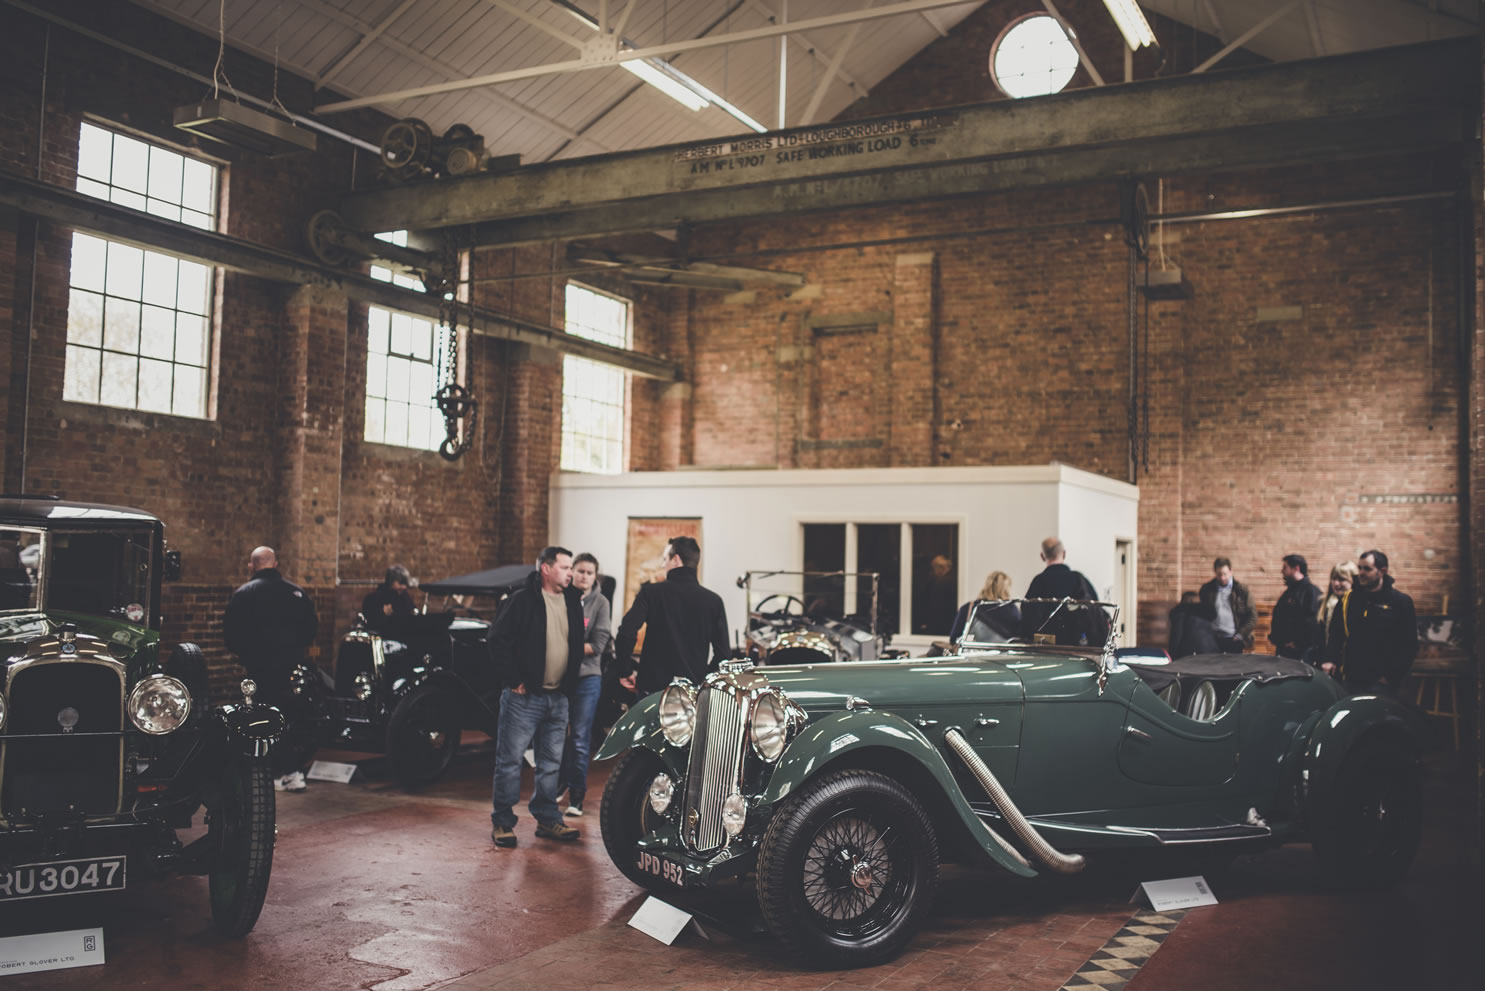 SCRAMBLE INTO SPRING, AS BICESTER HERITAGE RELEASE TICKETS FOR EVENT